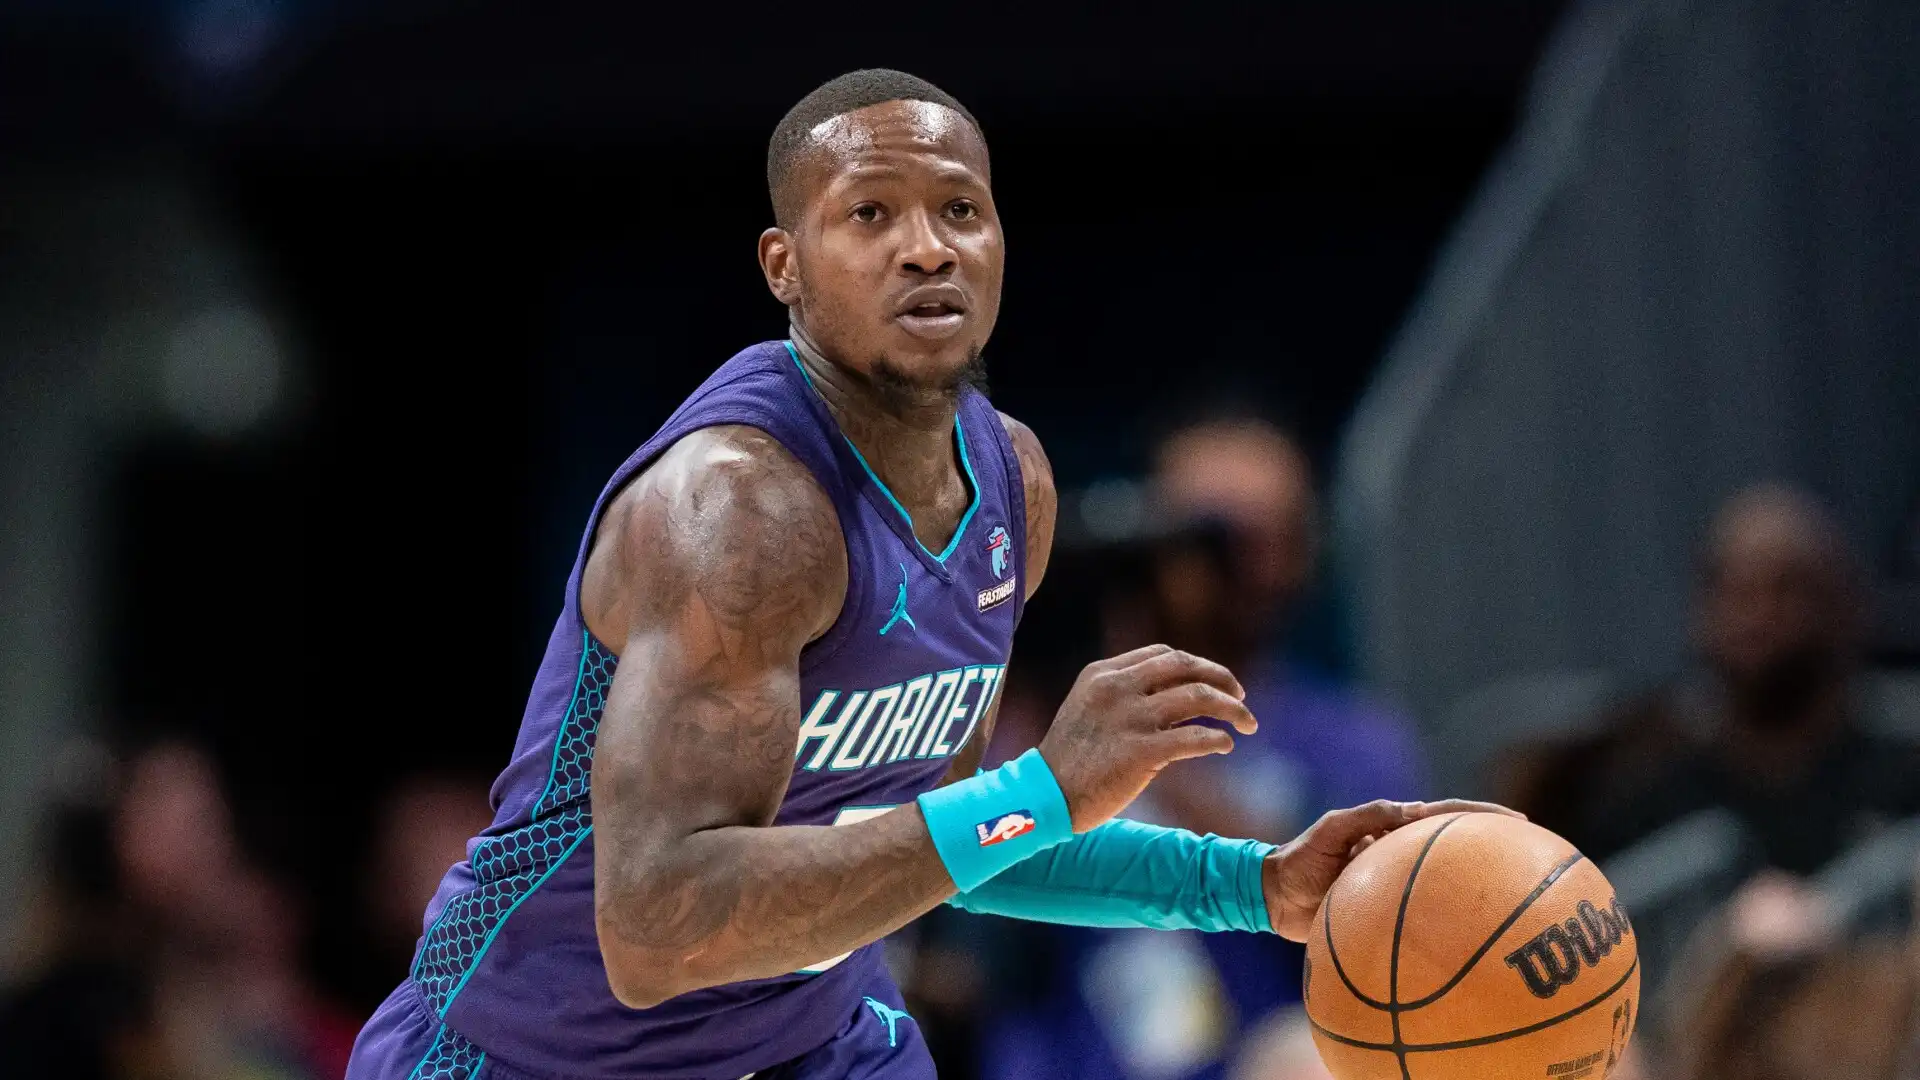 Hornets trade Terry Rozier to Heat for Kyle Lowry and pick - Yahoo Sports